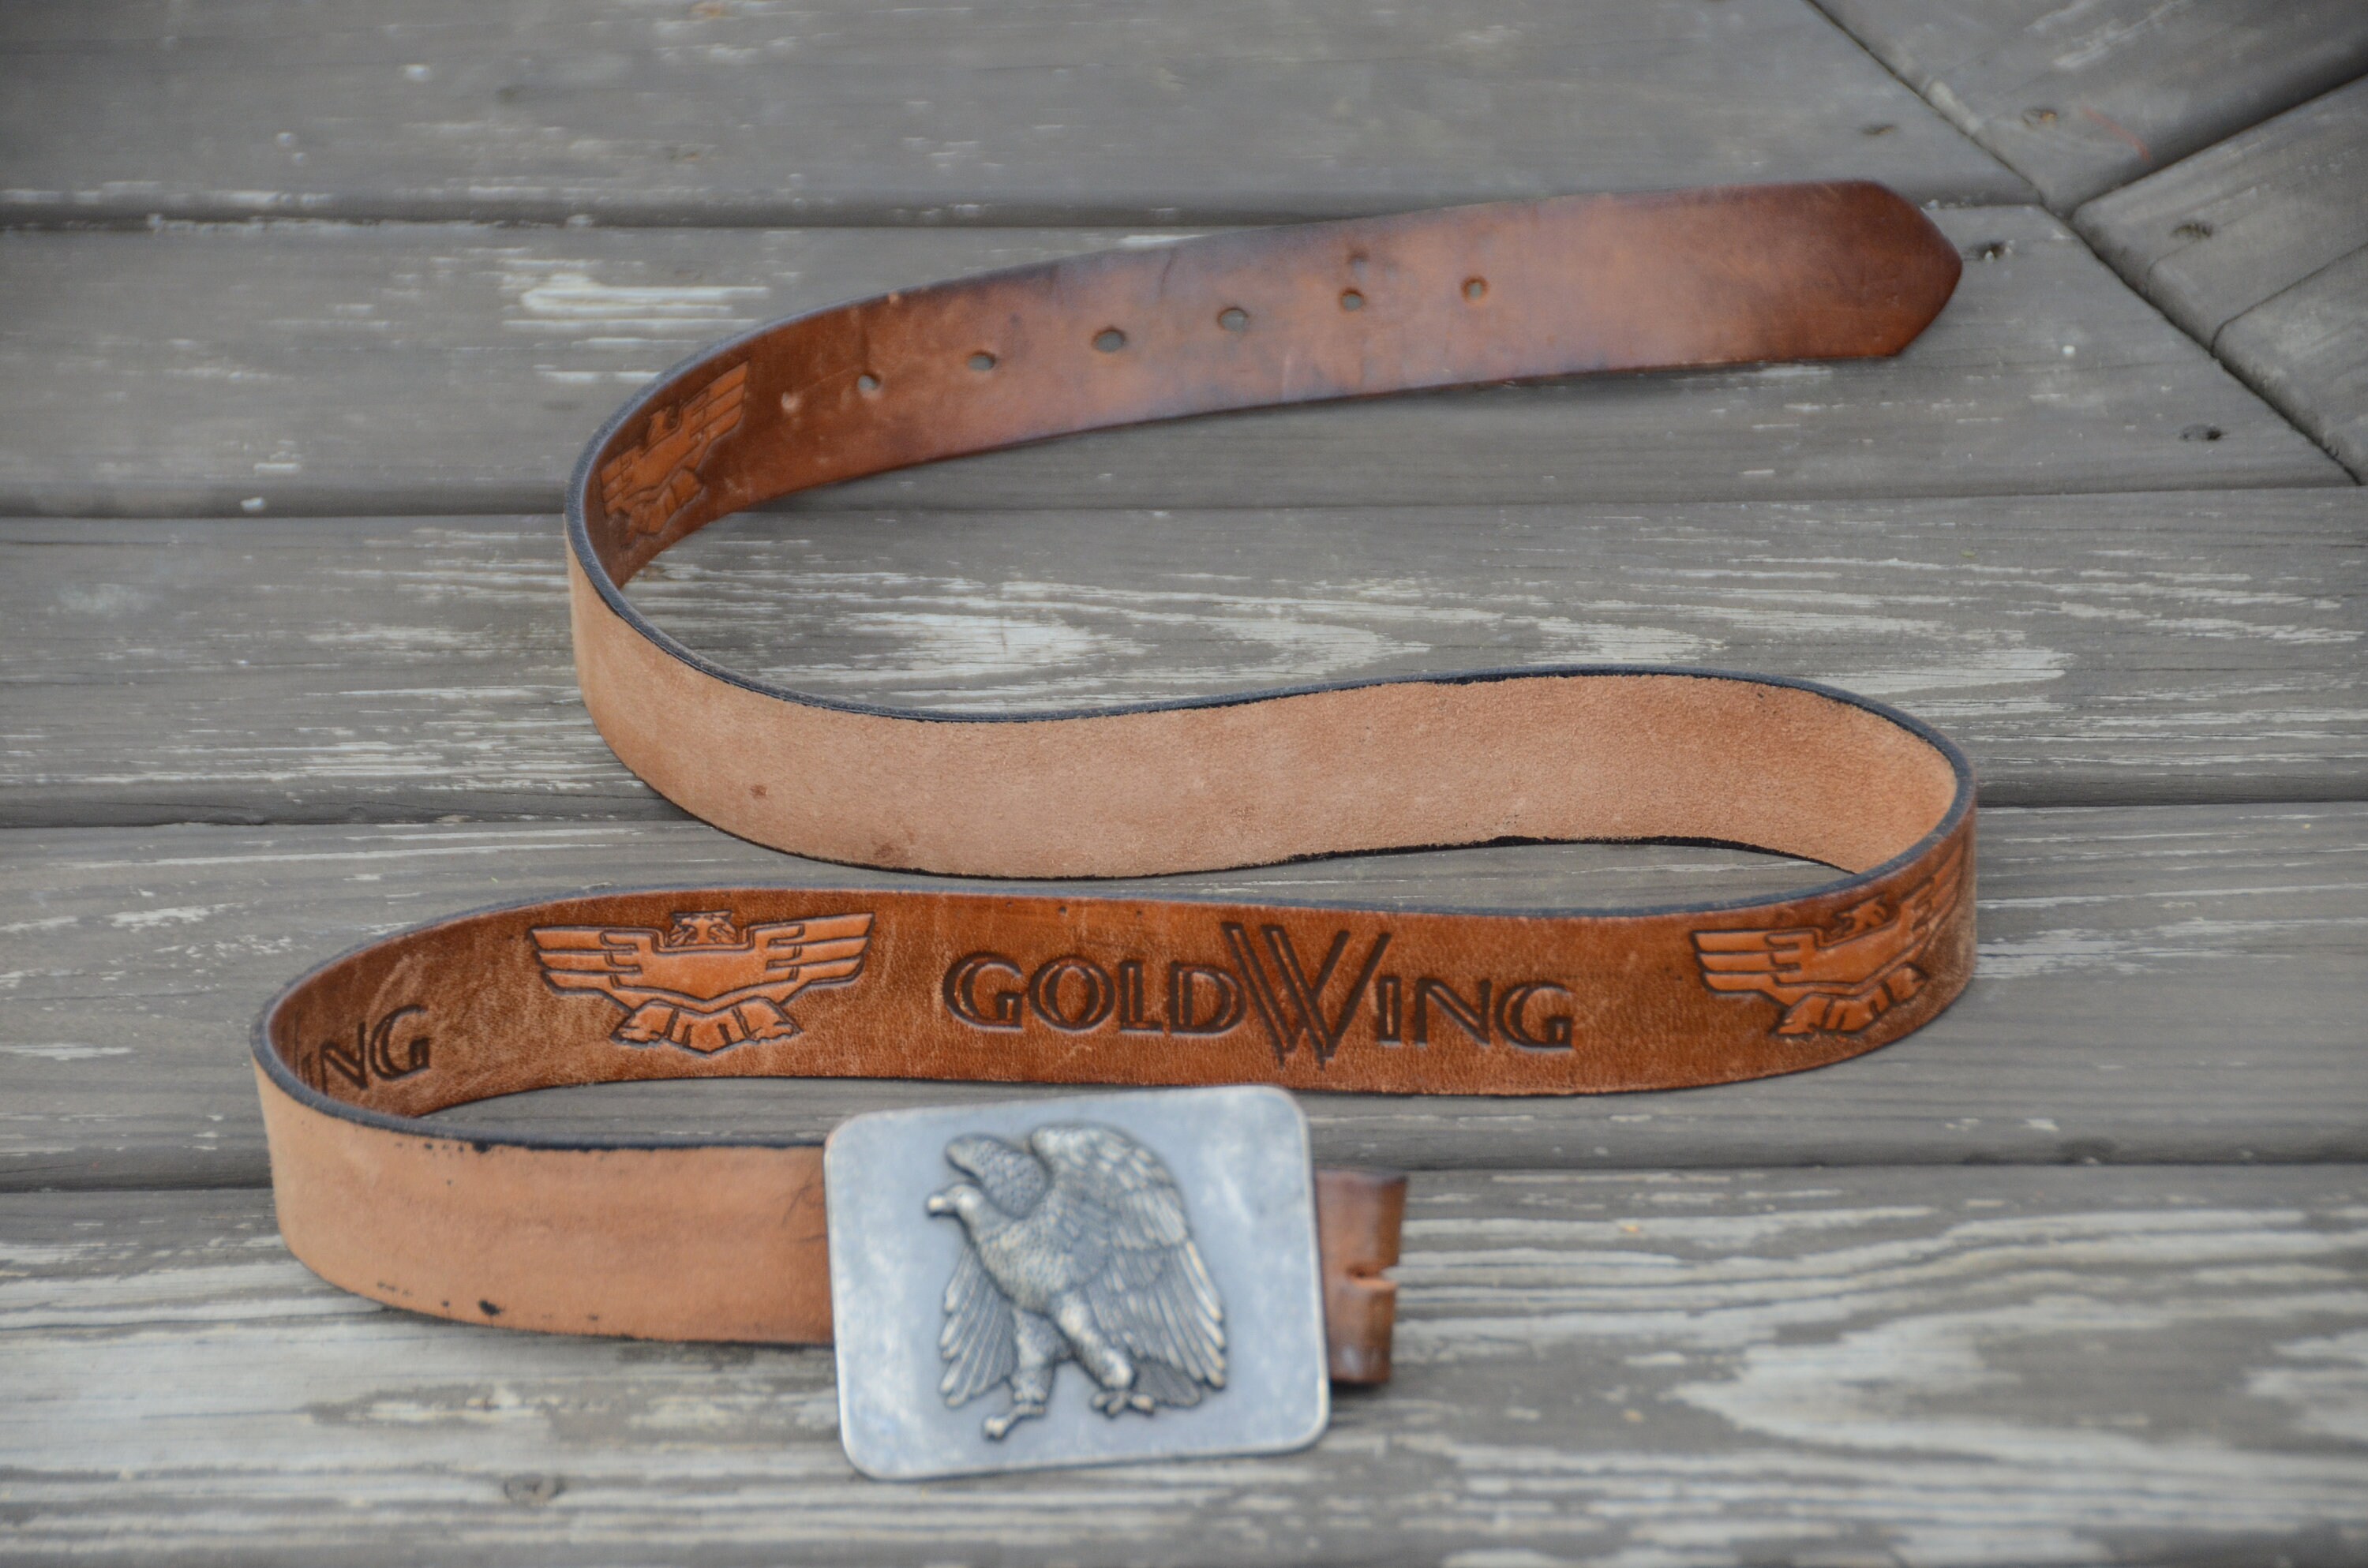 Vintage GOLD WING Leather Belt with Eagle Tooled Leather | Etsy